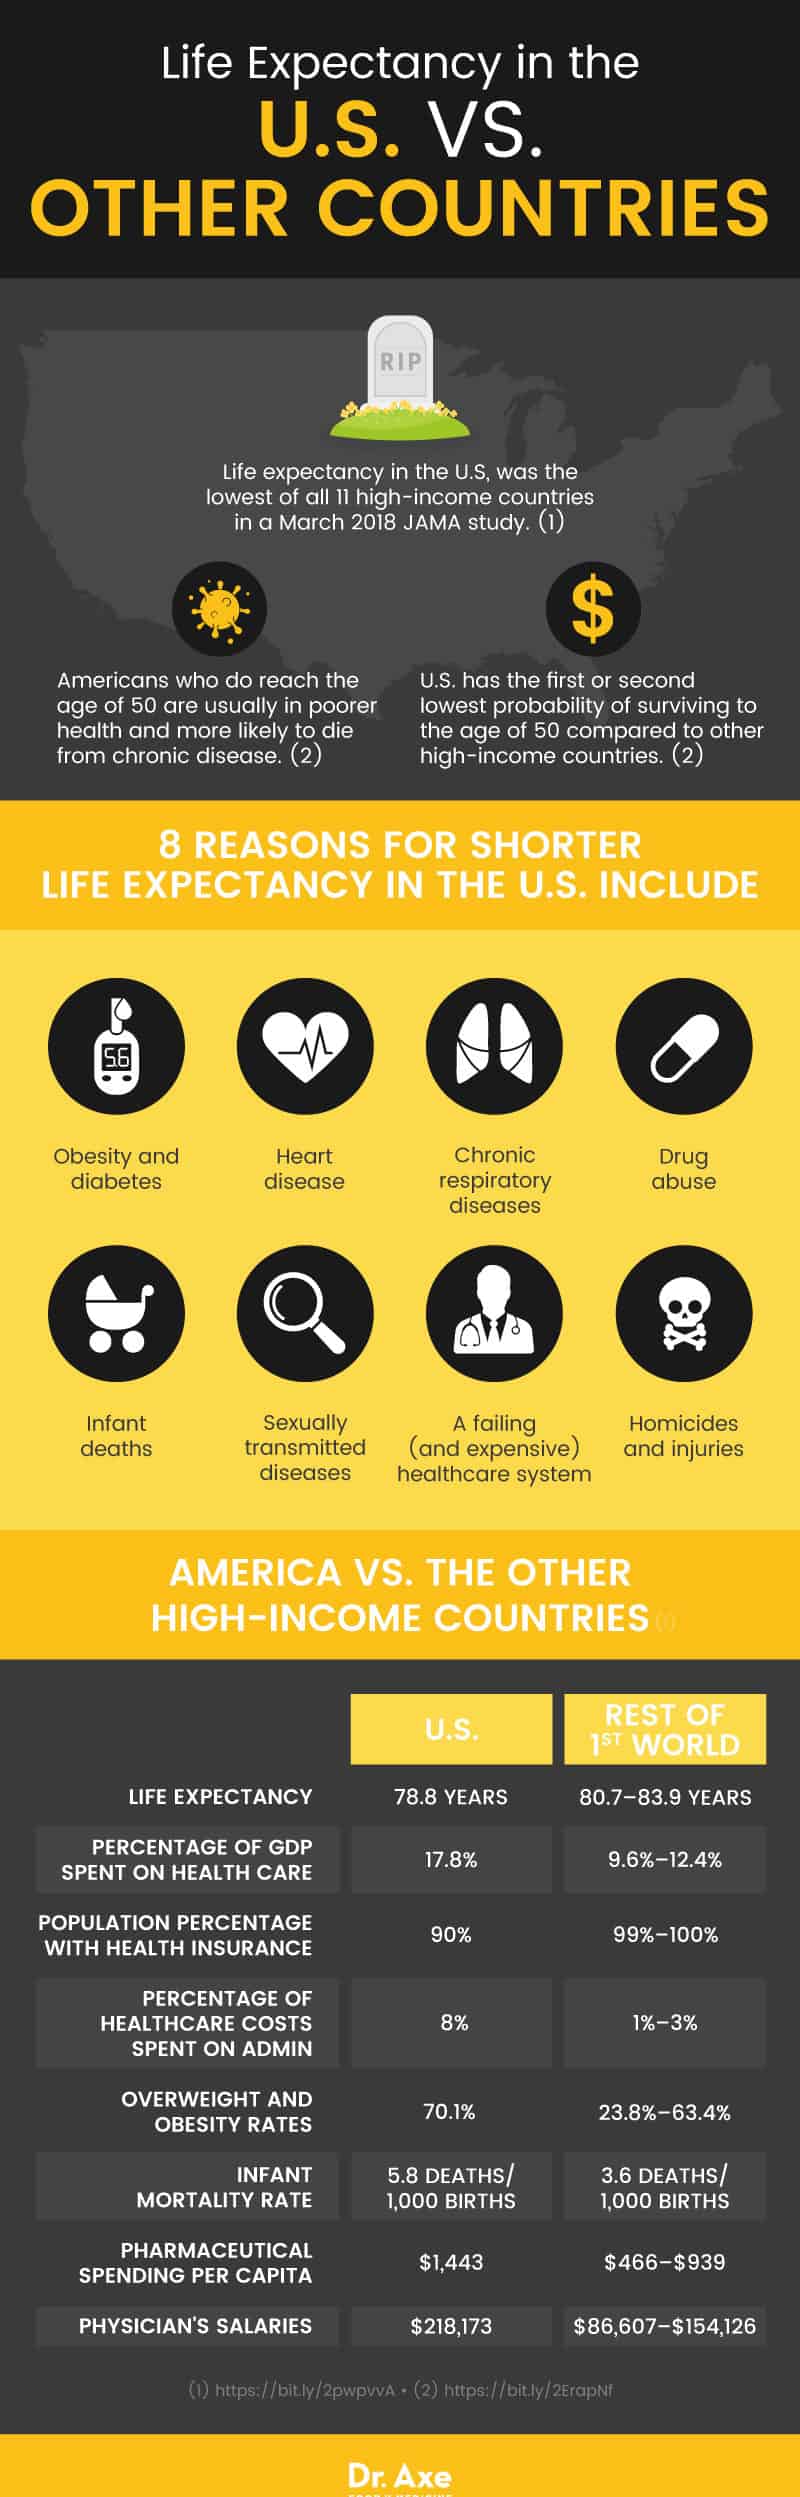 Life expectancy in the U.S. - Dr. Axe